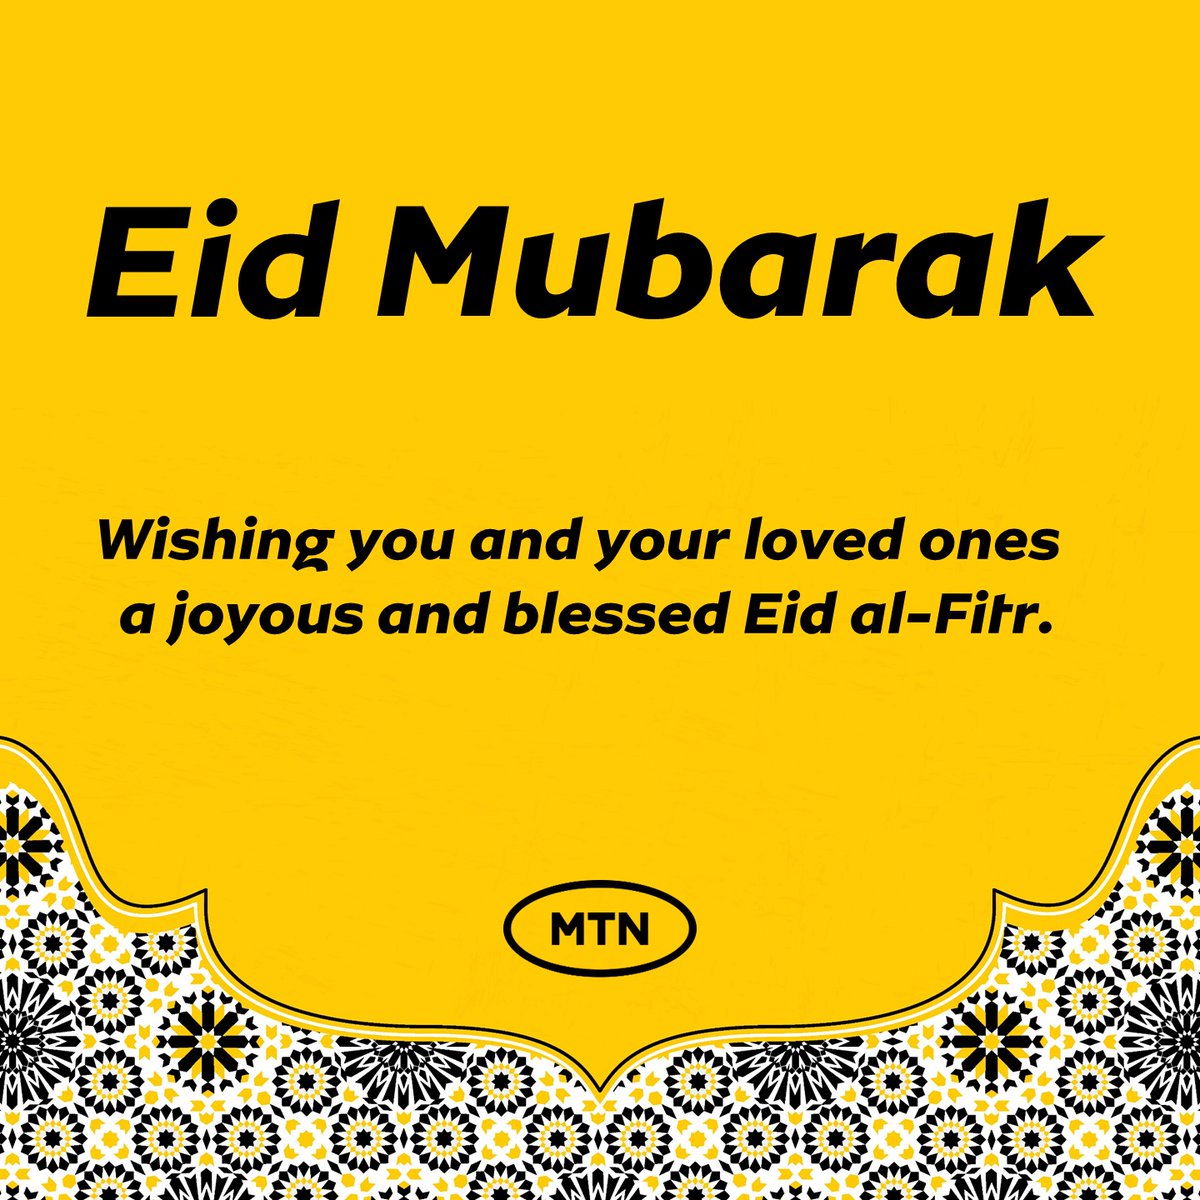 Eid Mubarak! May this joyous occasion fill your hearts with peace, happiness, and blessings. MTN Group would like to wish you and your loved ones a wonderful celebration filled with love and joy. #DoingGoodTogether